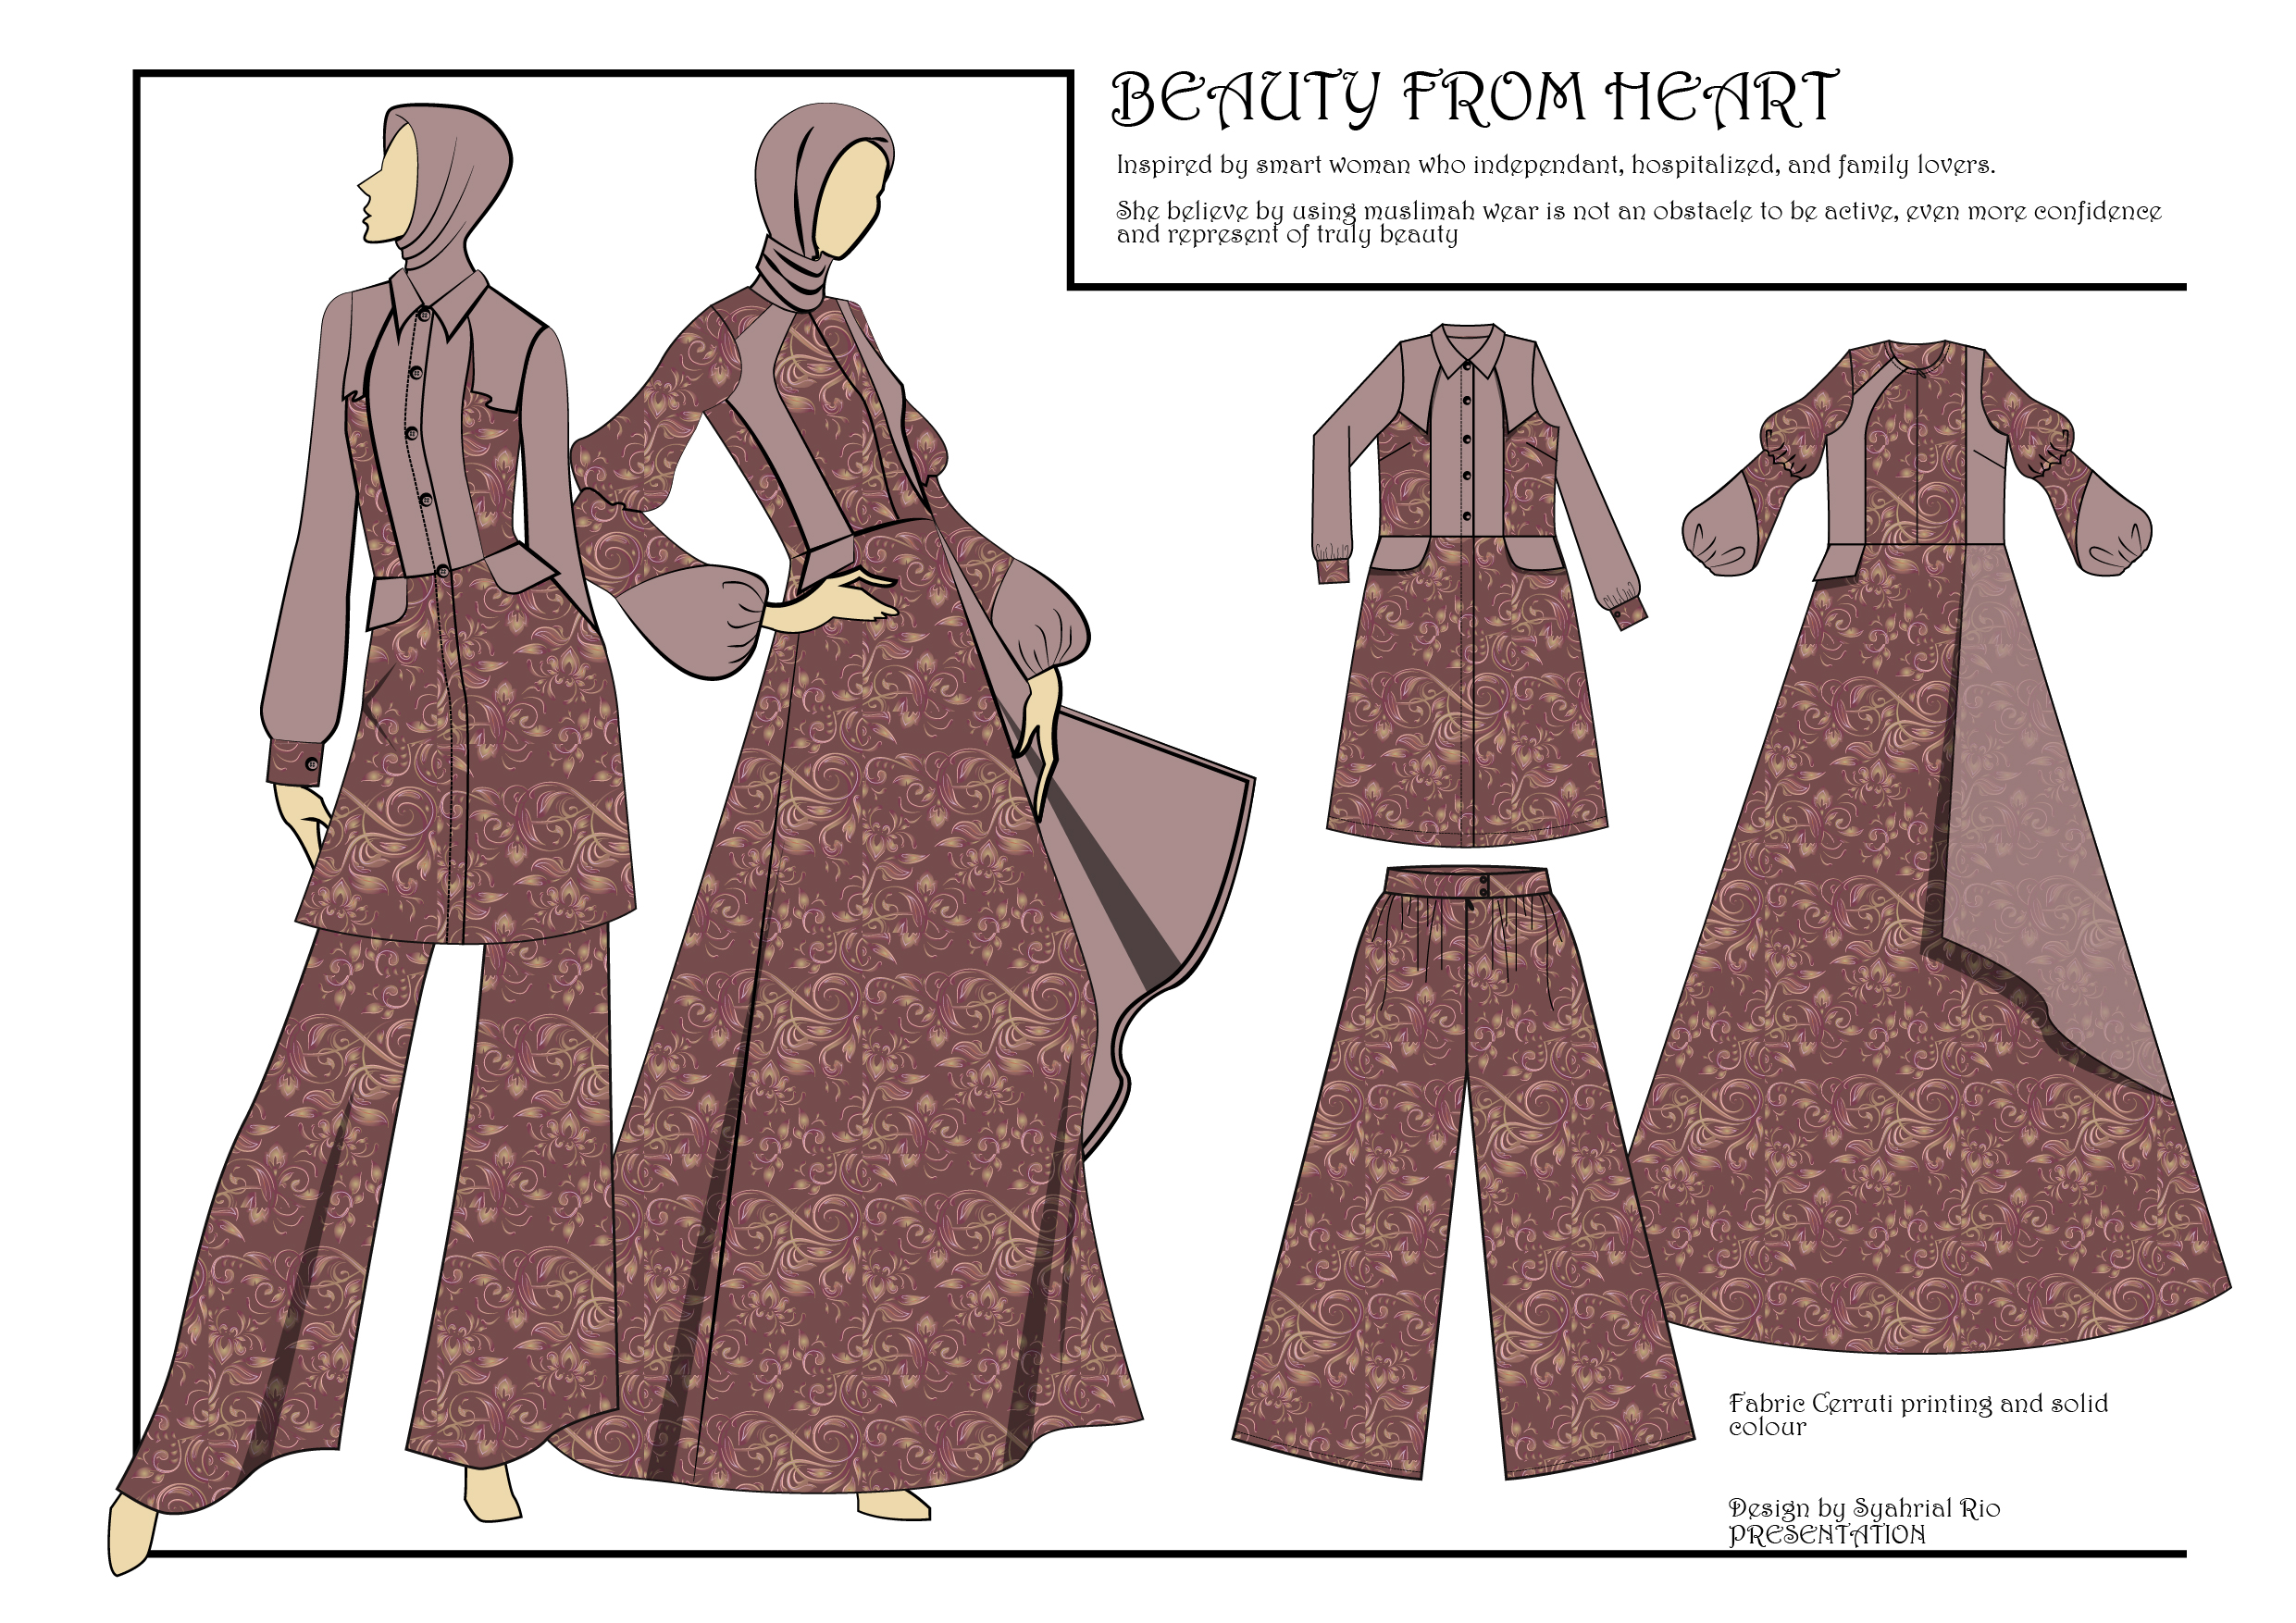 BENUTY FROM HEWRT

Inspired by smart woman who independant, hospitalized, and family lovers.

  
  
   

She believe bg asing mashmah wear 1s not an obstacle to be active, even more confidence
and represent of traly beaaty

Fabric Cerrati printing and sohd
colour

 
 
 

  
 

Design by Syahrial Rio
PRESENTATION